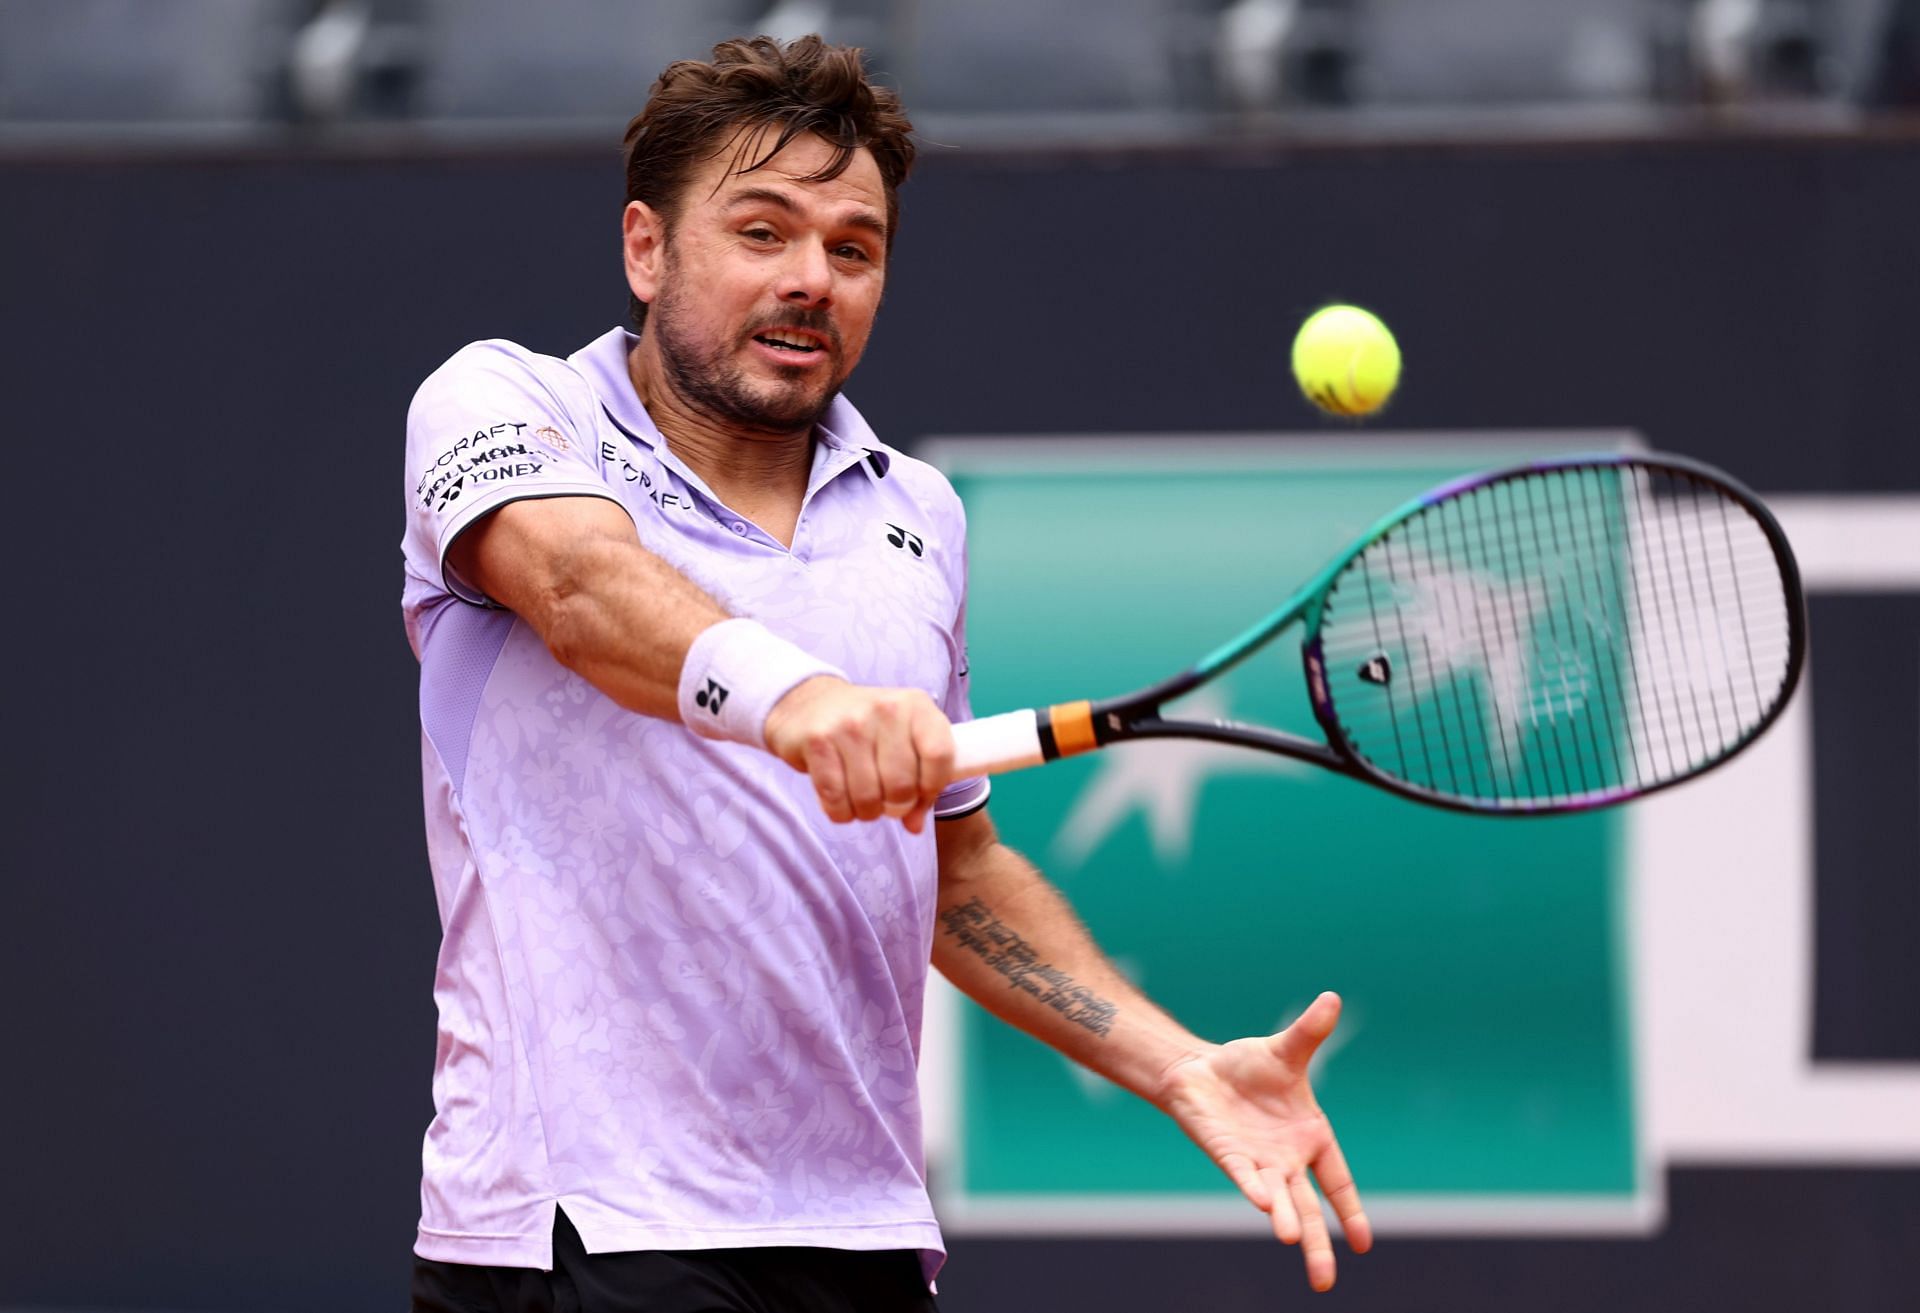 Wawrinka is through to the second round at Roland Garros.